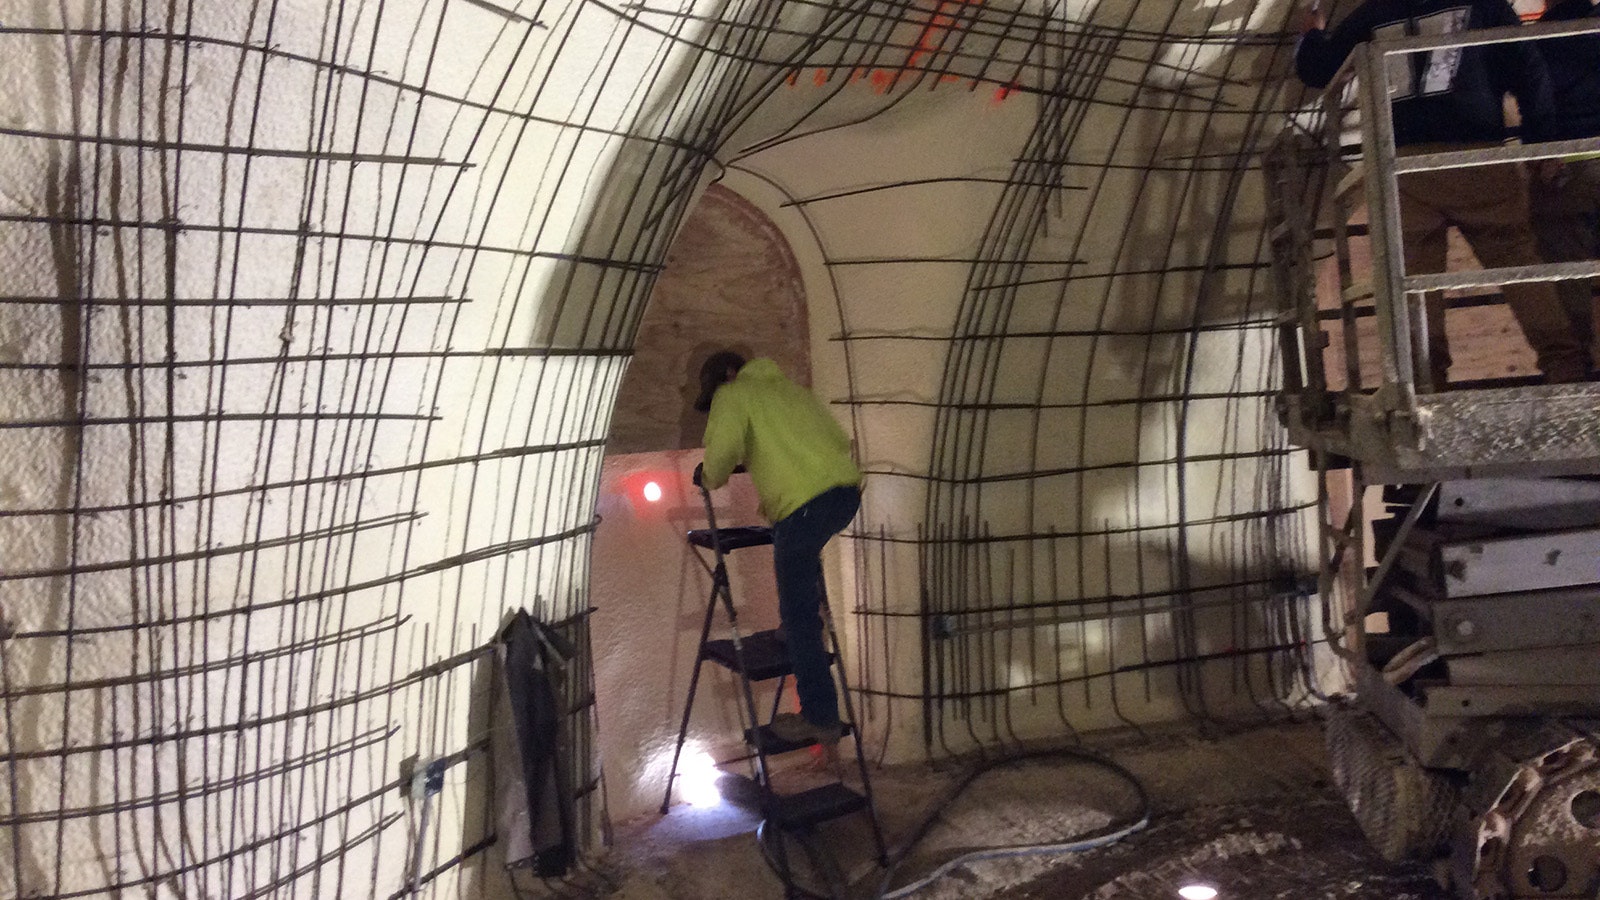 The dome structure contains more than 900 pieces of rebar.